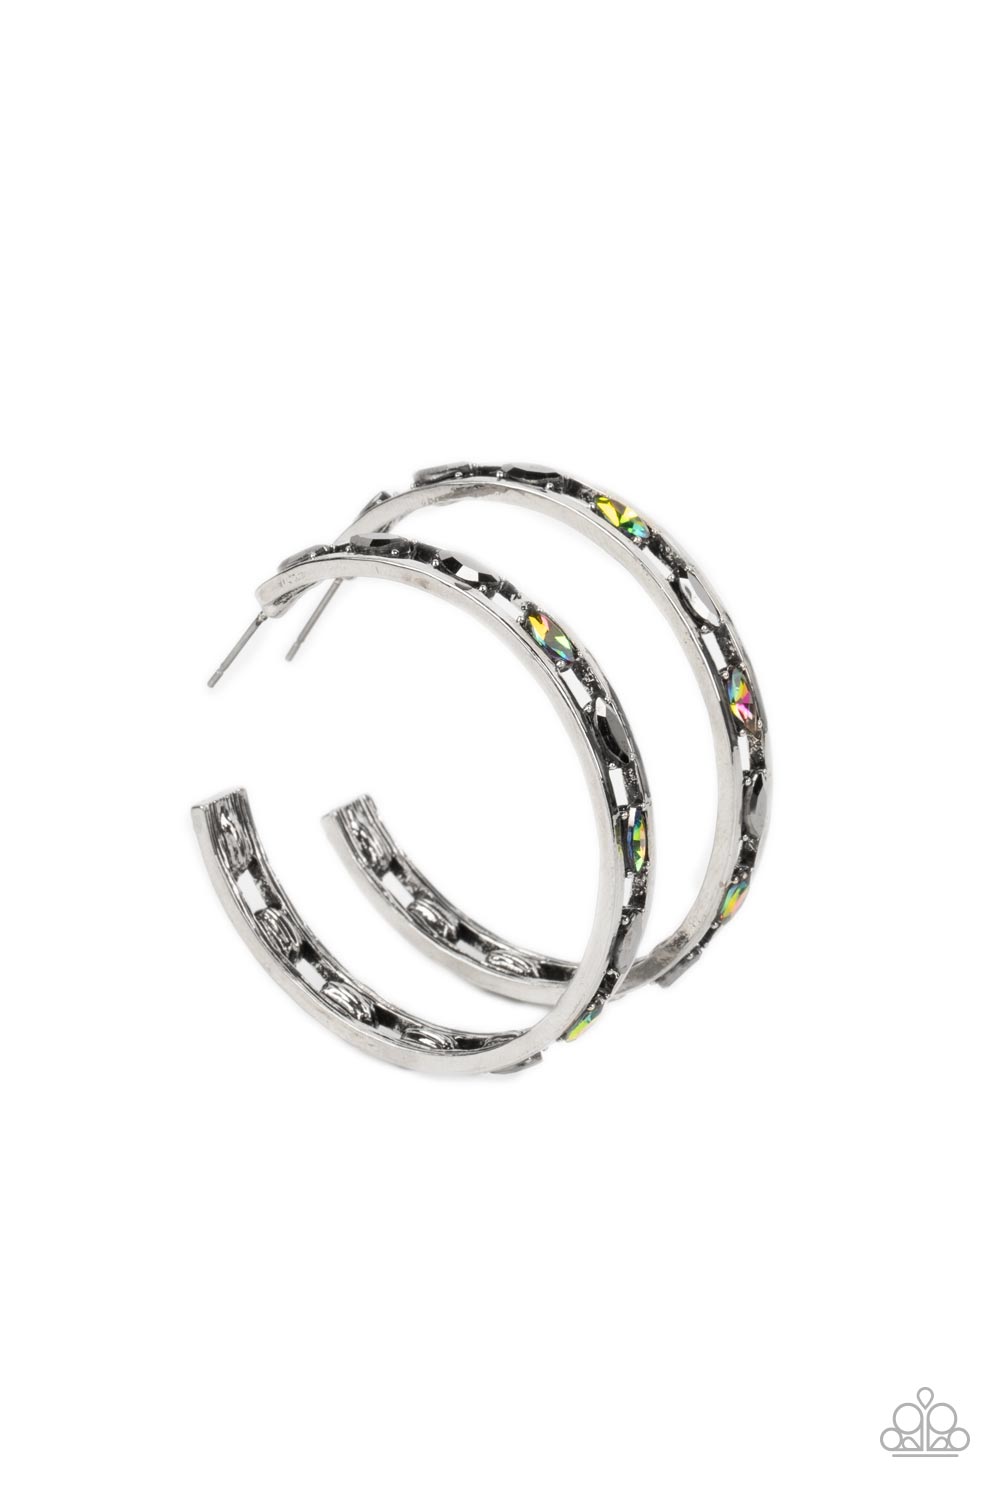 The Gem Fairy Multi Oil Spill Hoop Earrings - Paparazzi Accessories- lightbox - CarasShop.com - $5 Jewelry by Cara Jewels